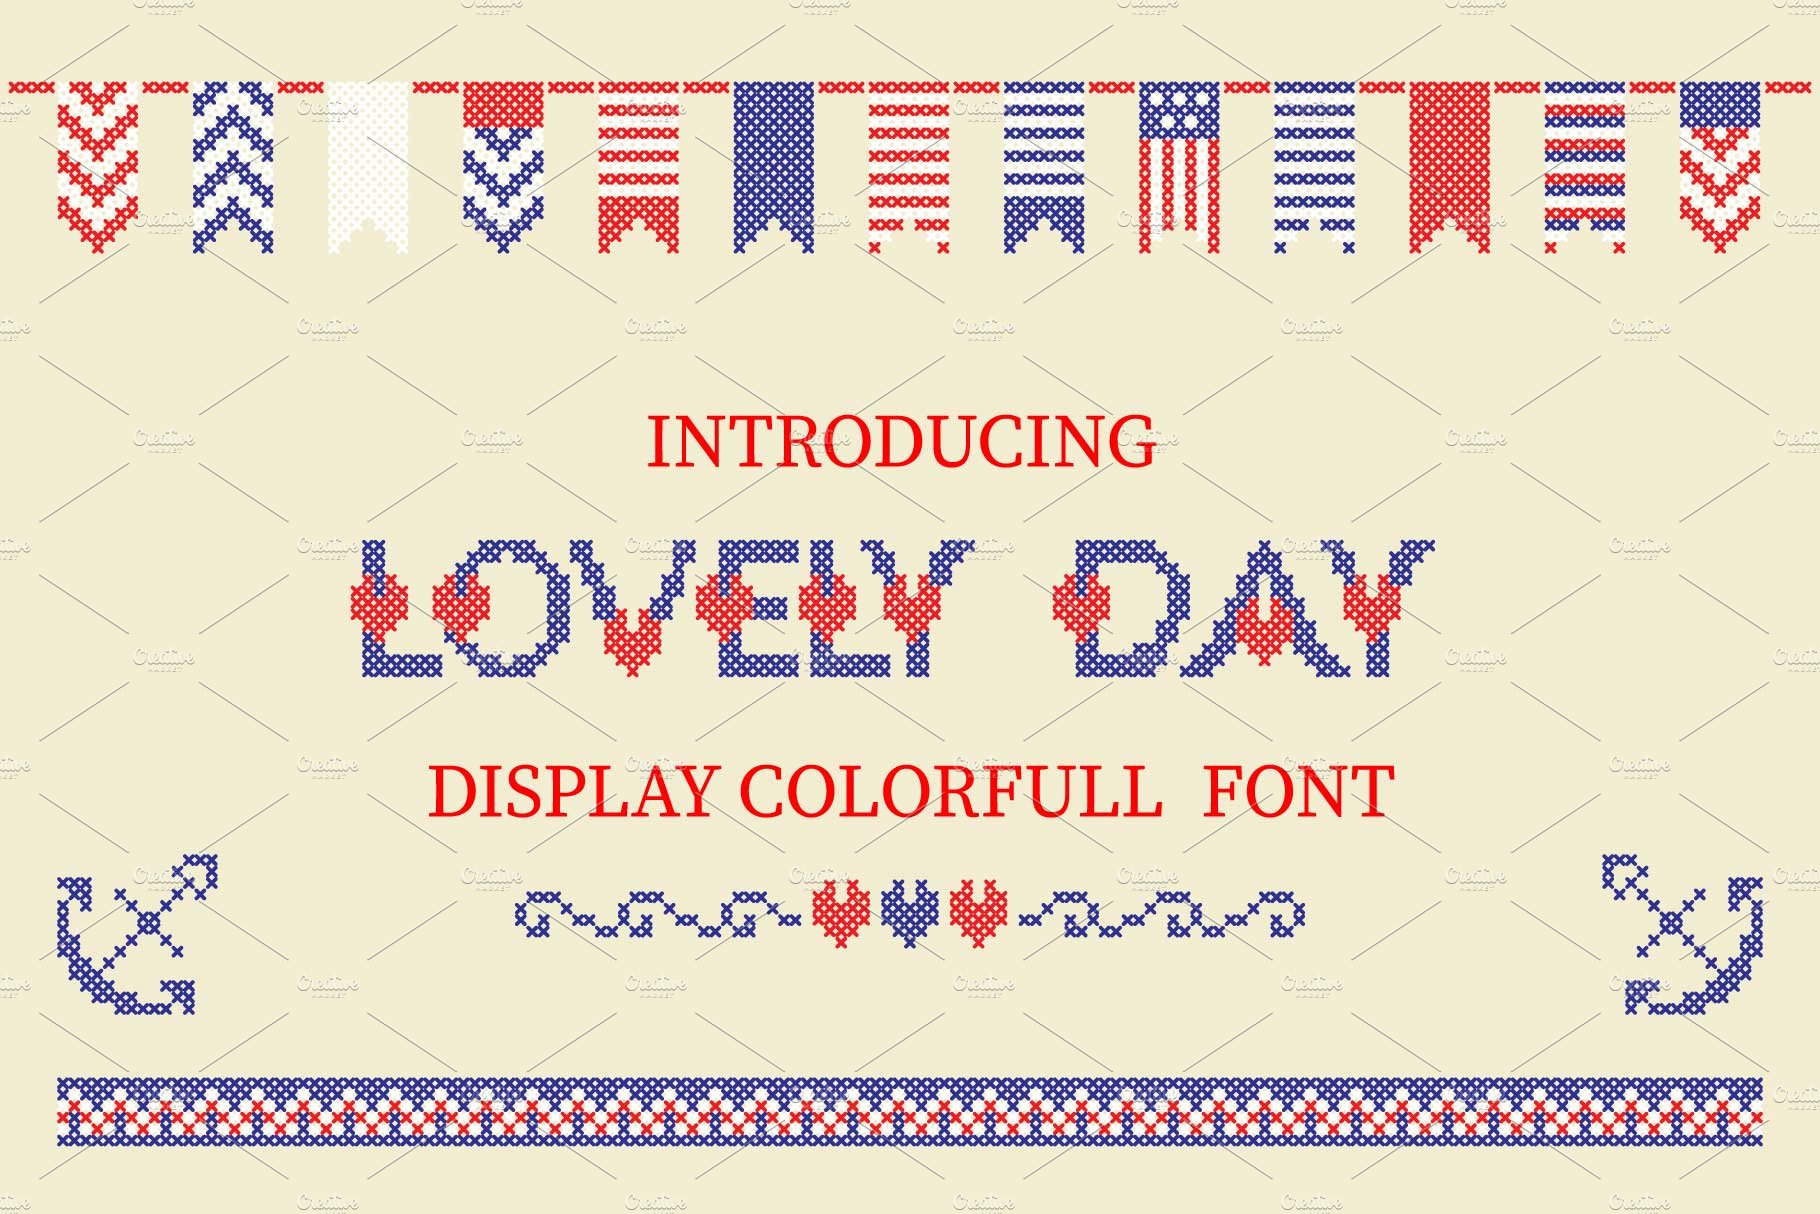 LOVELY-DAY-COLOR-CROSSSTICH font cover image.